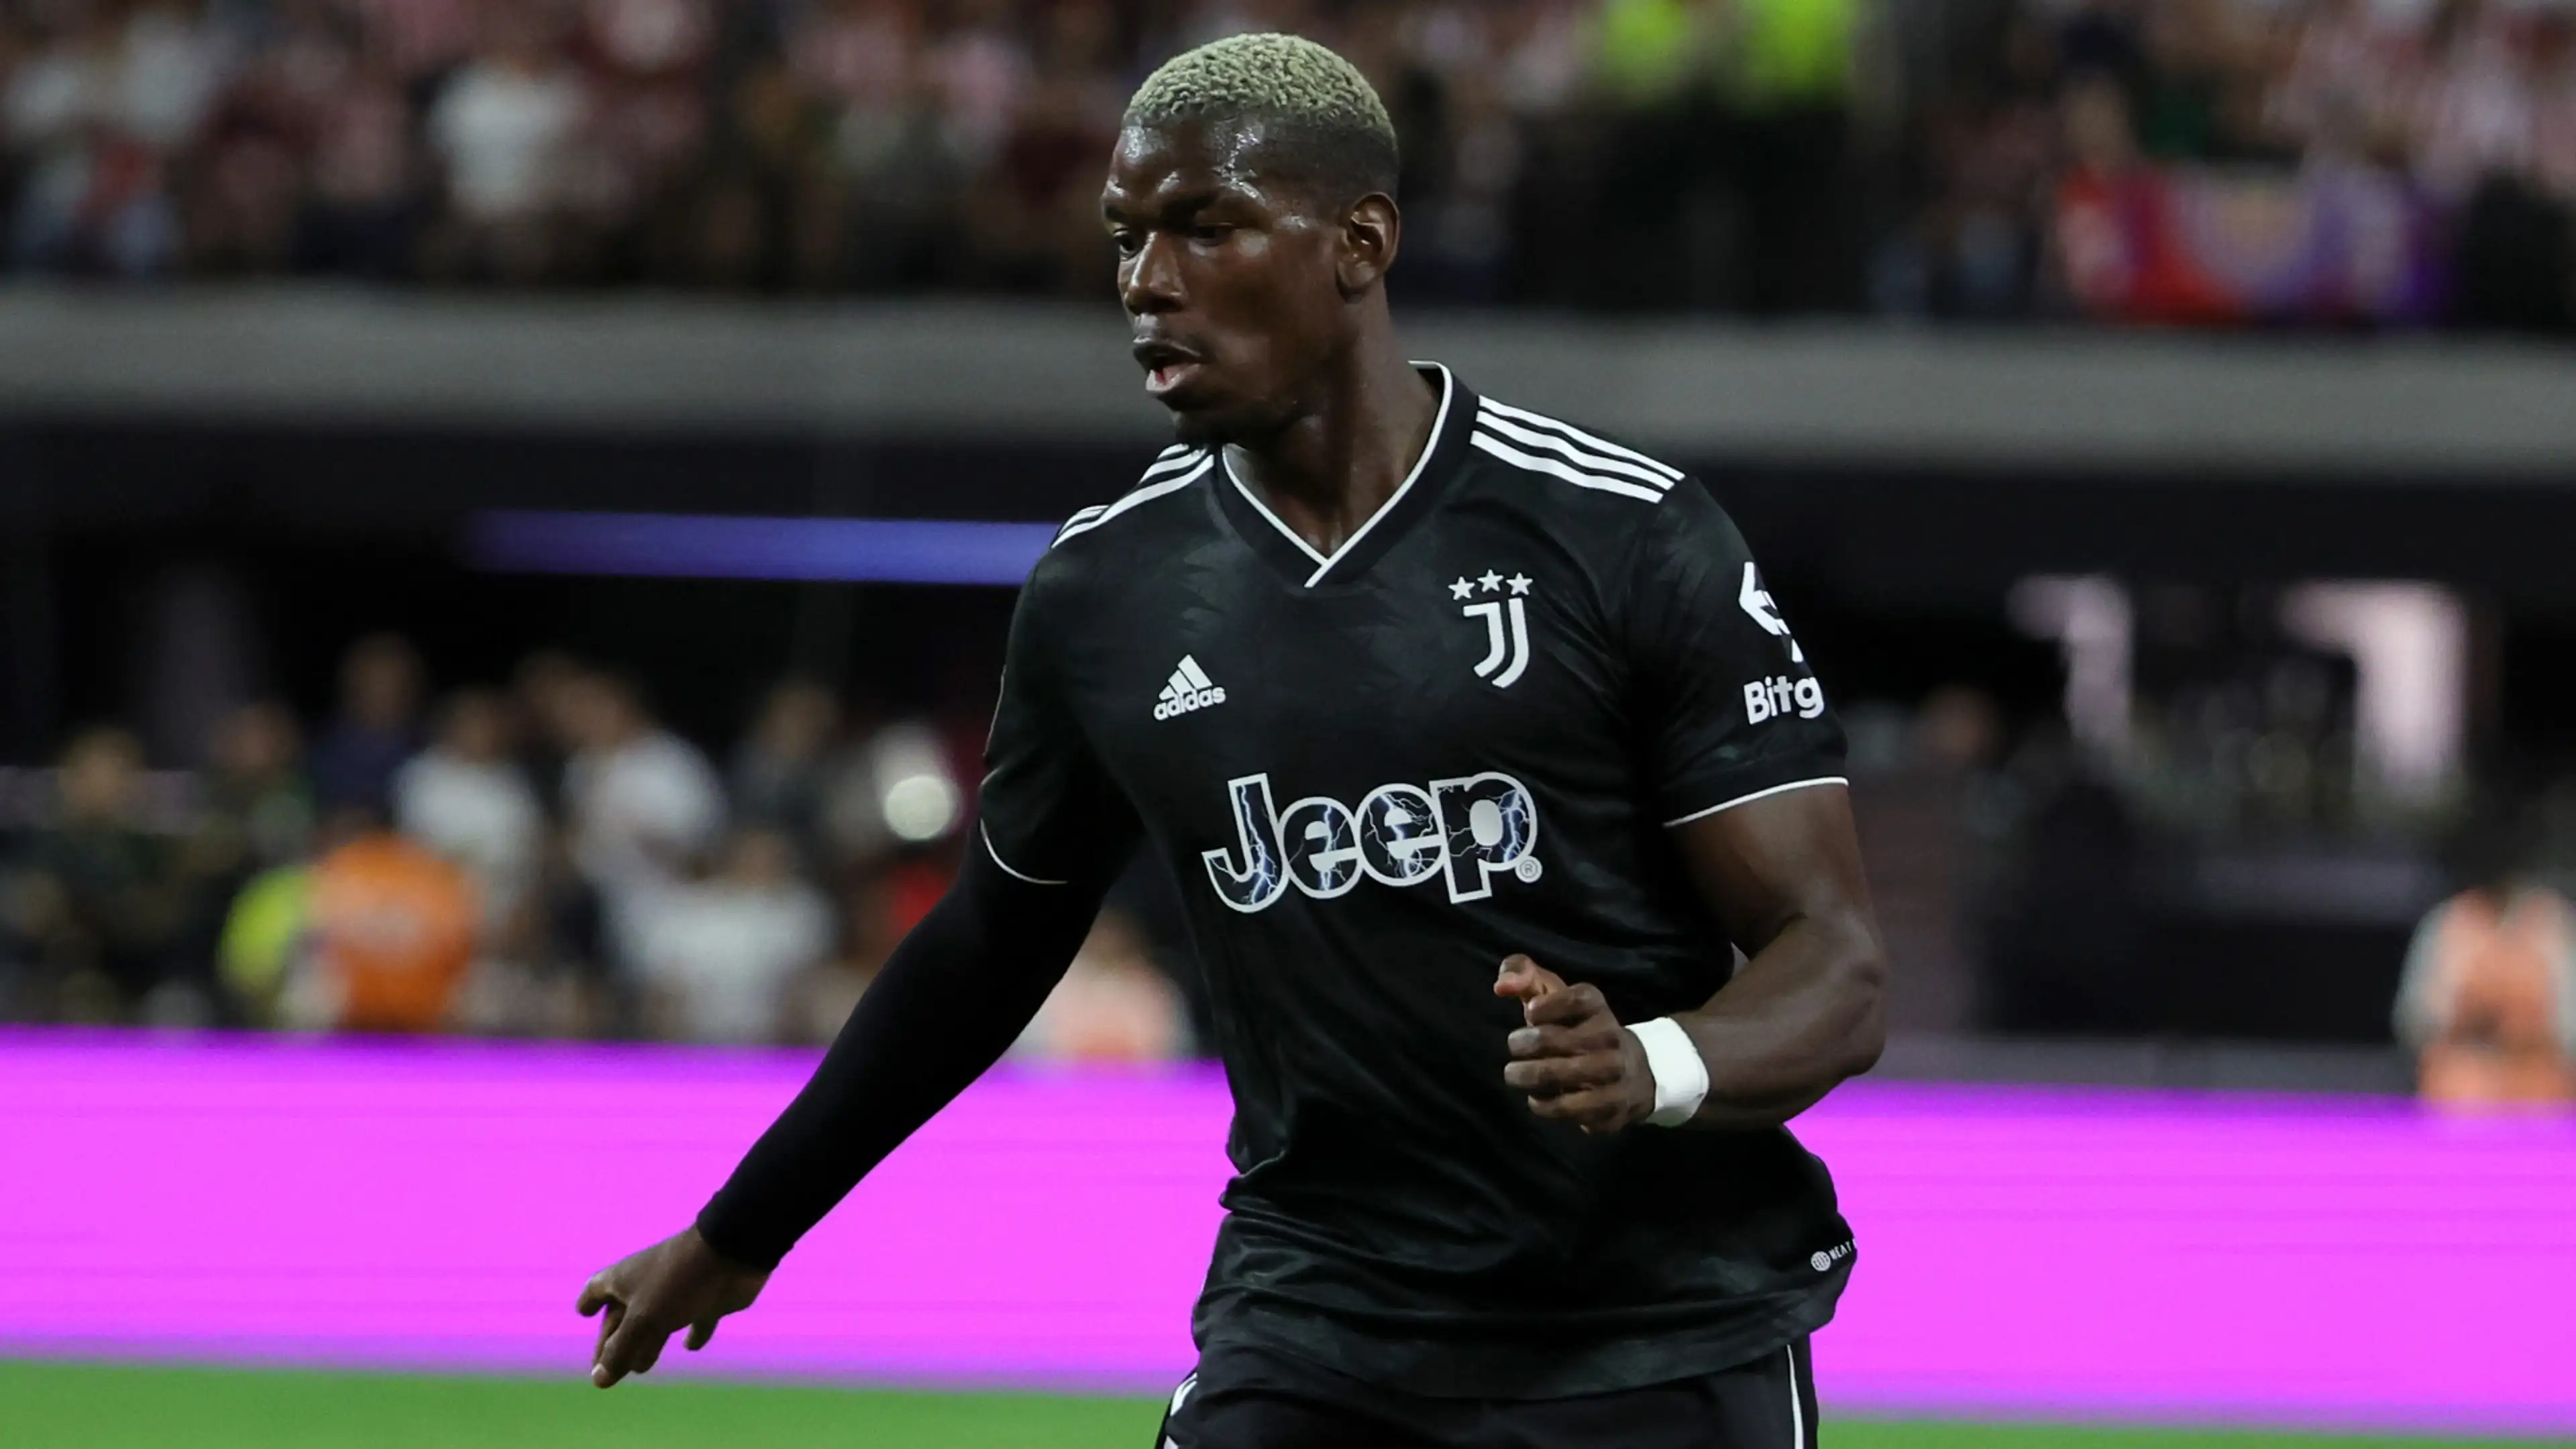 Pogba Fails Second Doping Test For Testosterone